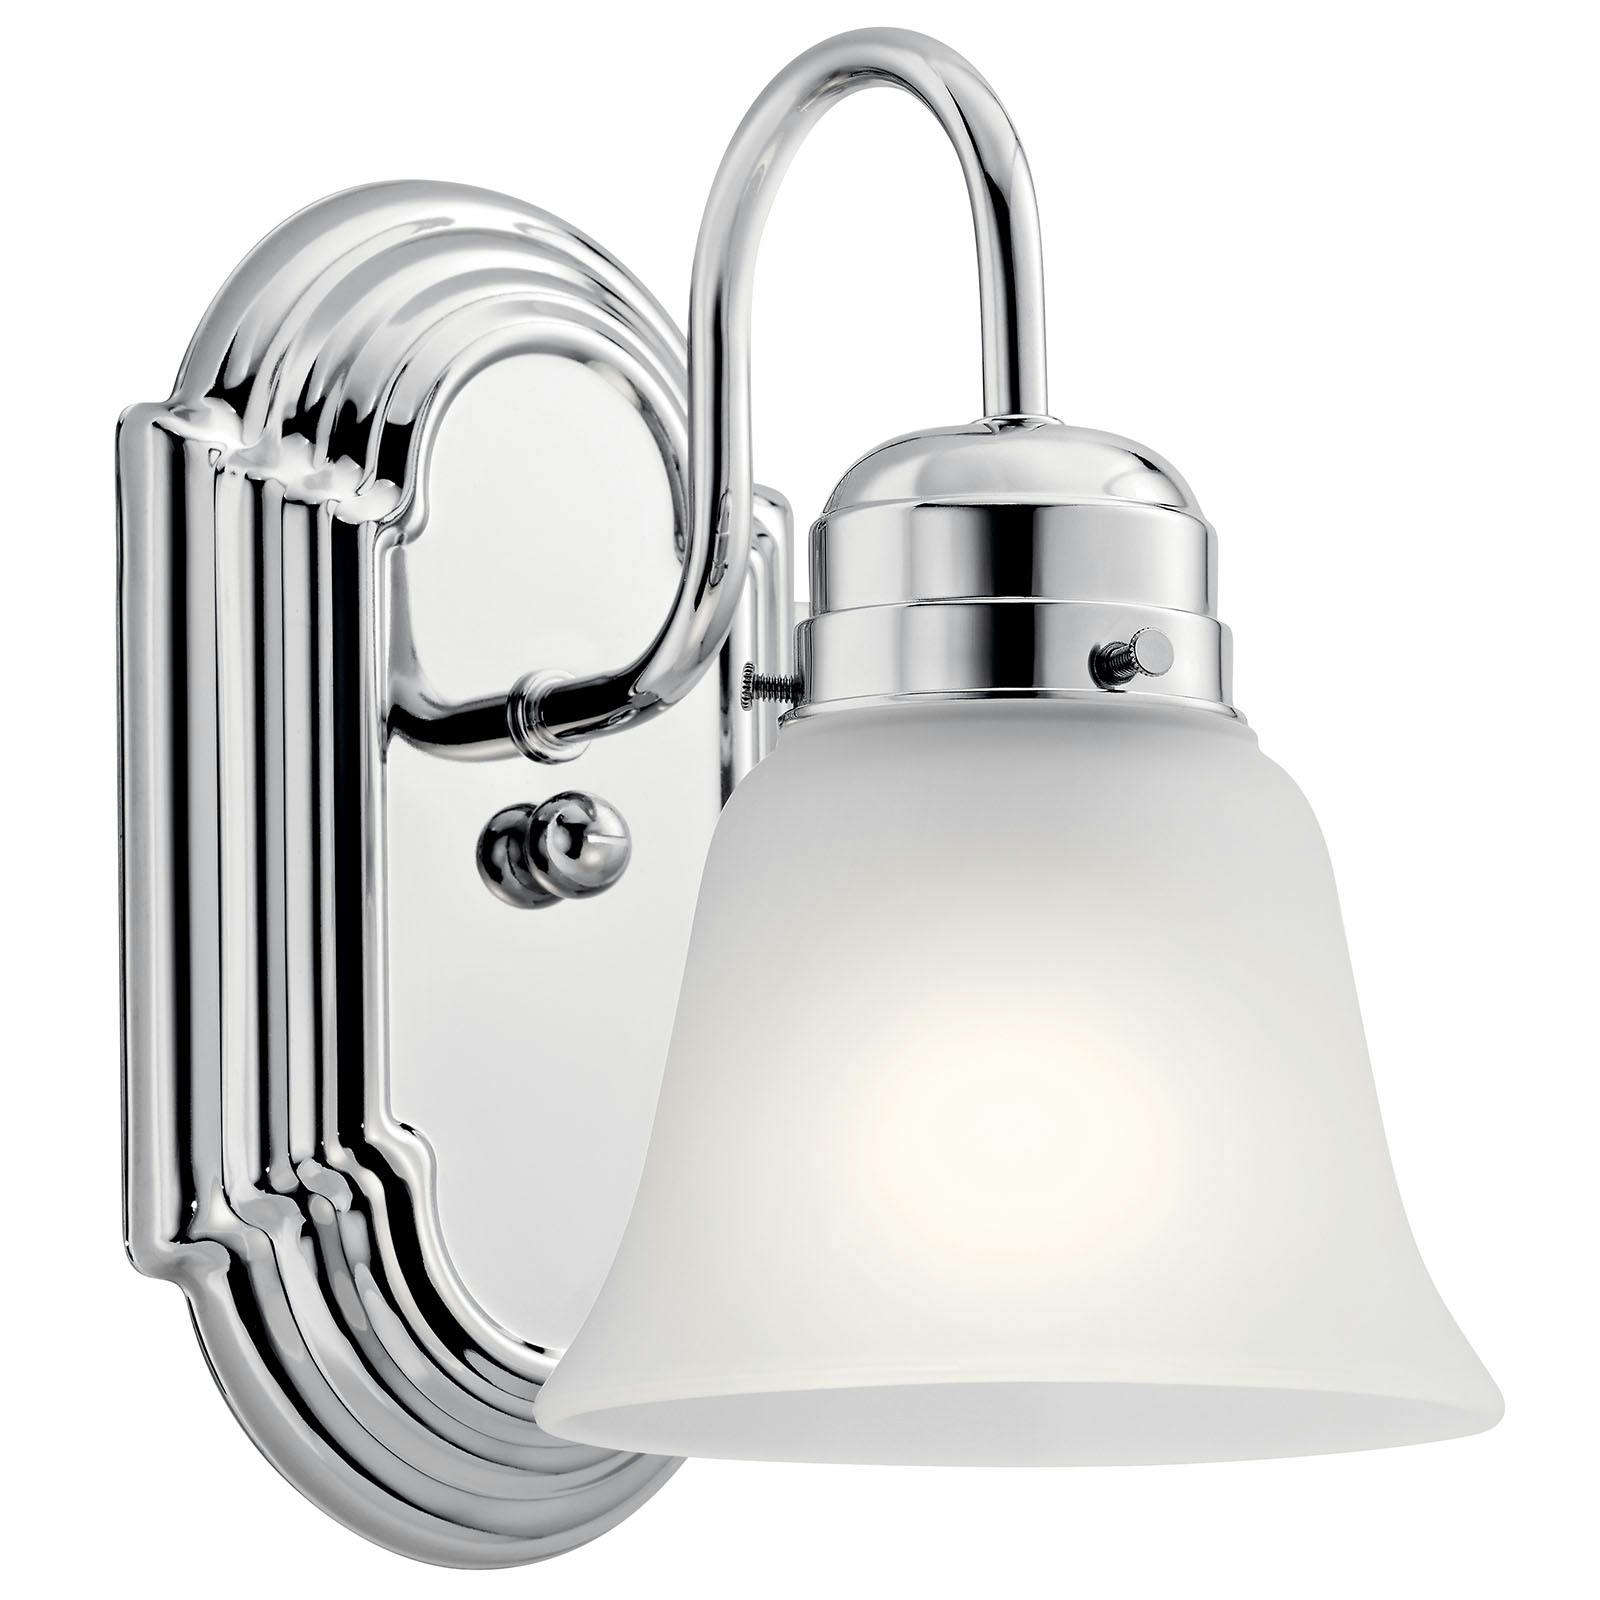 1 Light Wall Sconce Chrome Finish on a white background